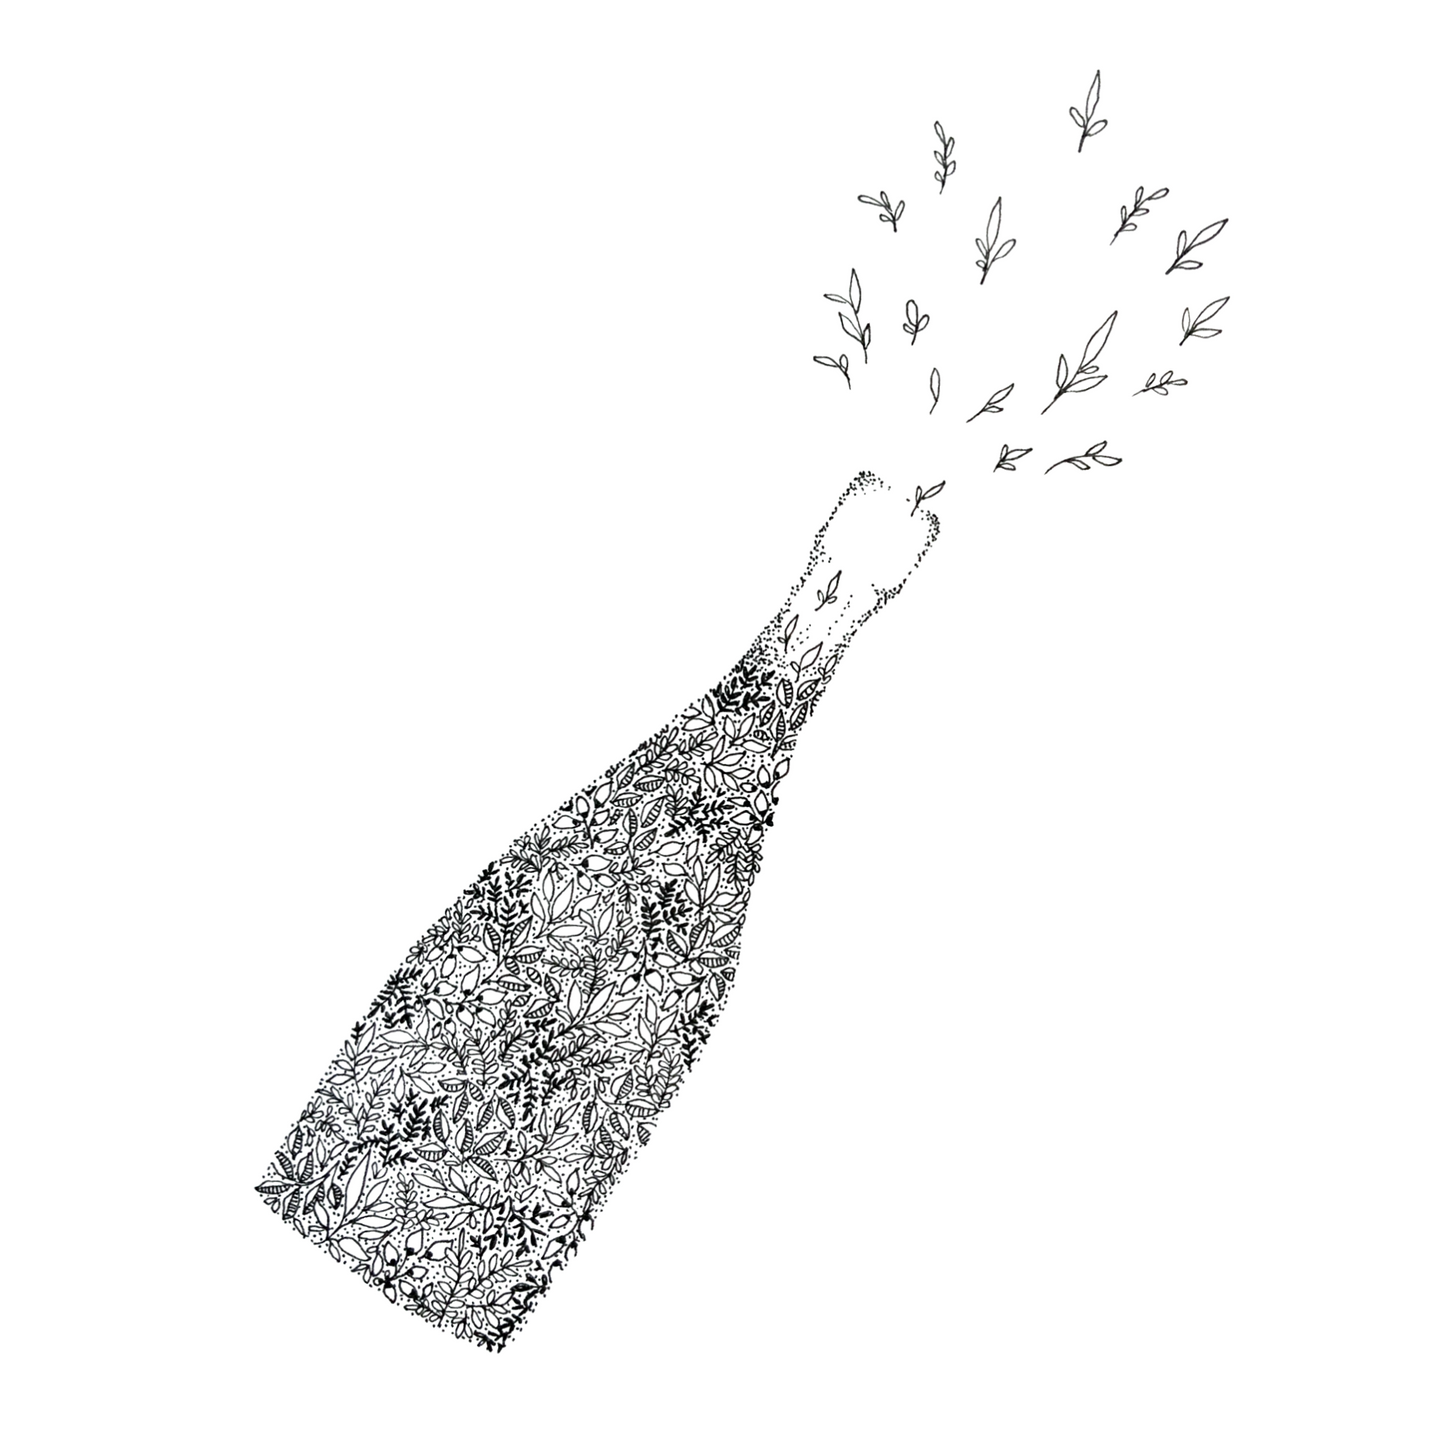 illustration shows black and white floral champagne bottom drawing. Image is in a zoomed out setting to show the full body of the bottle.